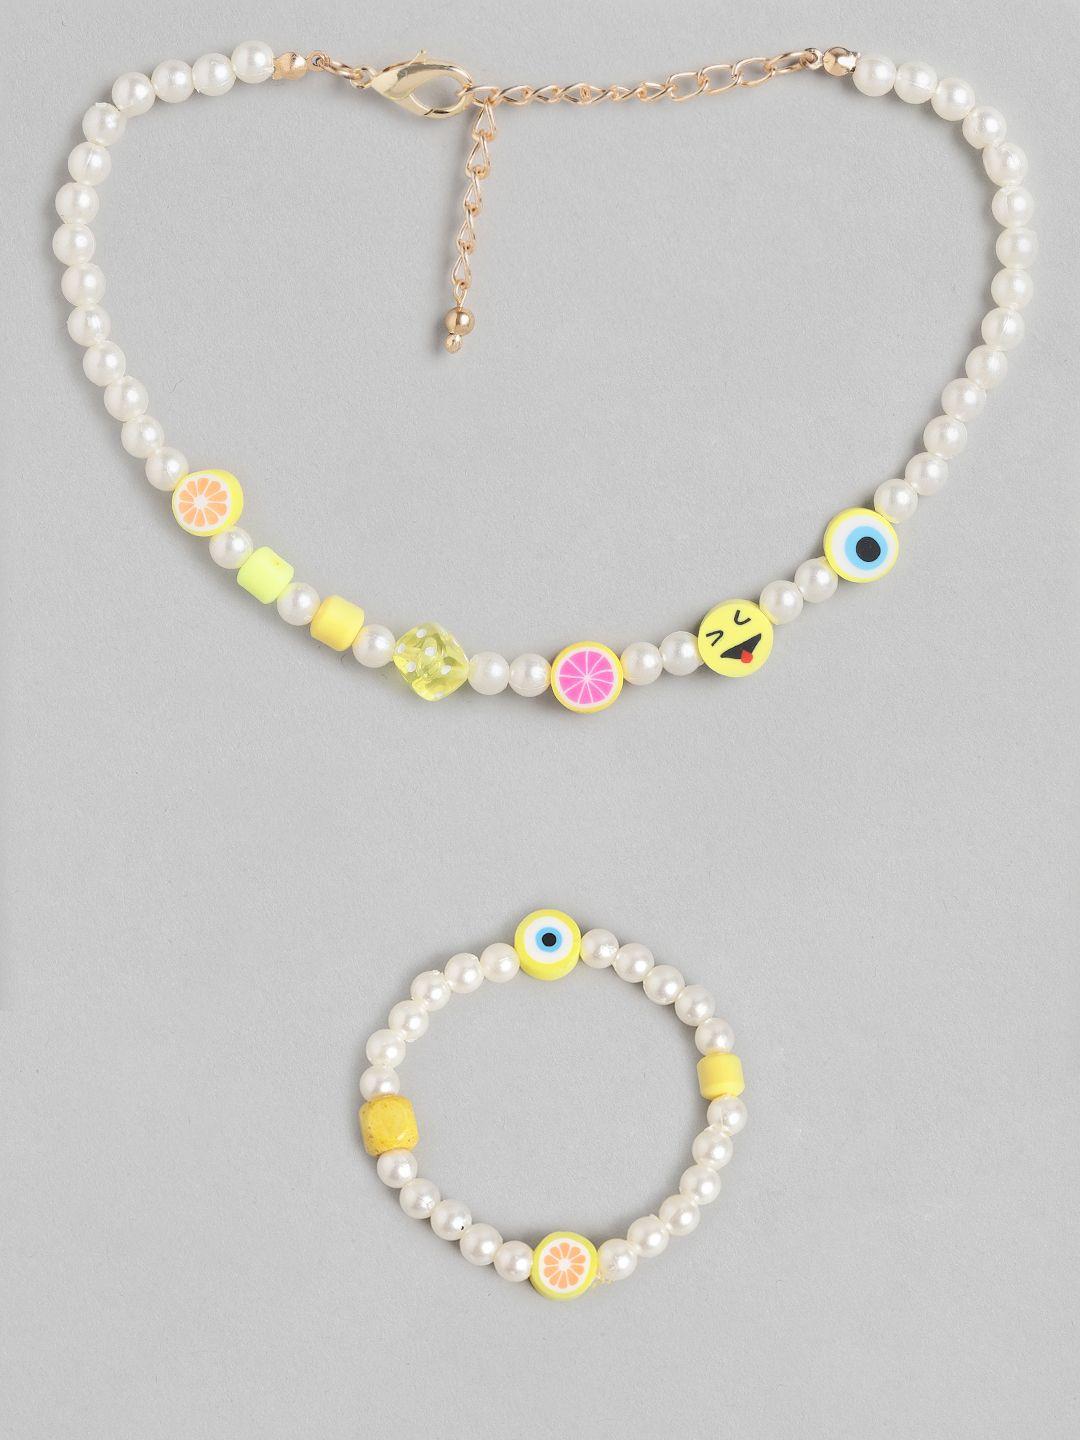 blueberry kids girls white & yellow gold-plated pearls handcrafted necklace & bracelet set